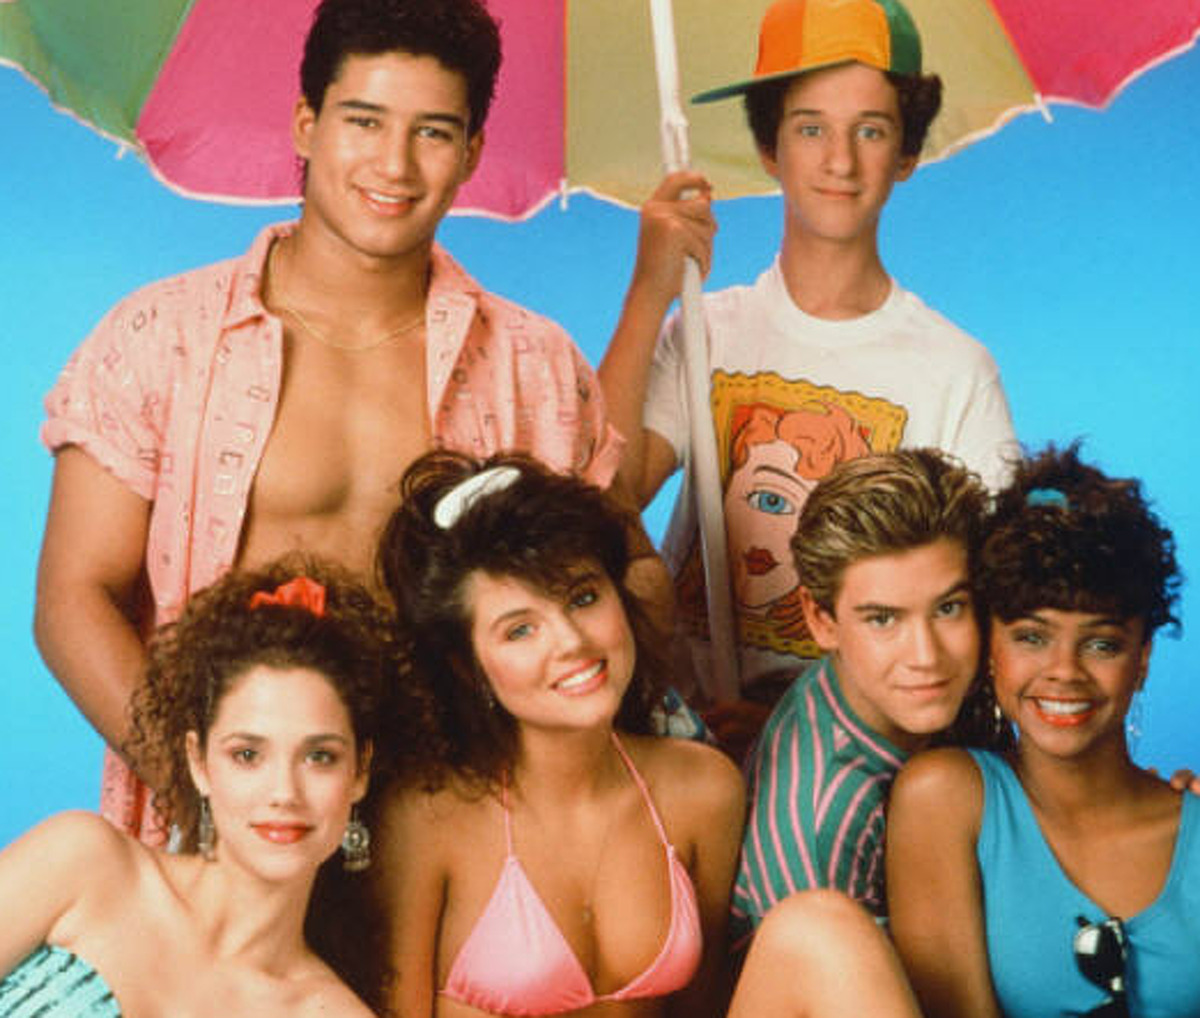 Then & now: The cast of 'Saved by the Bell'  See what happened to your favorite characters from your favorite '90s show after "Saved by the Bell" went off the air.